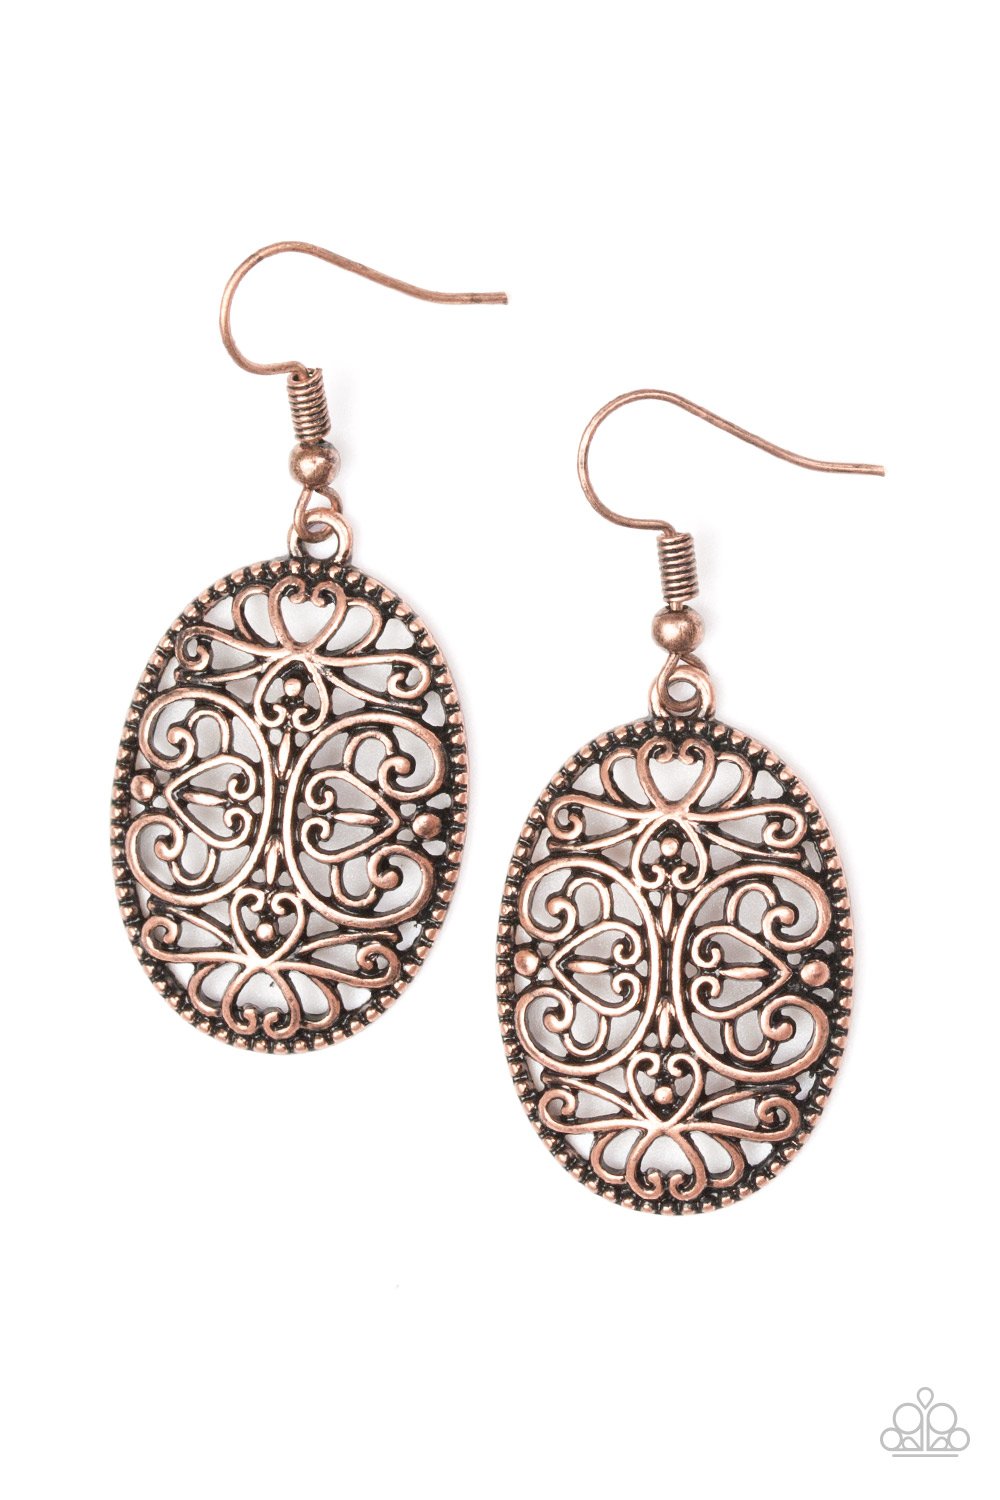 Paparazzi Earring ~ Wistfully Whimsical - Copper